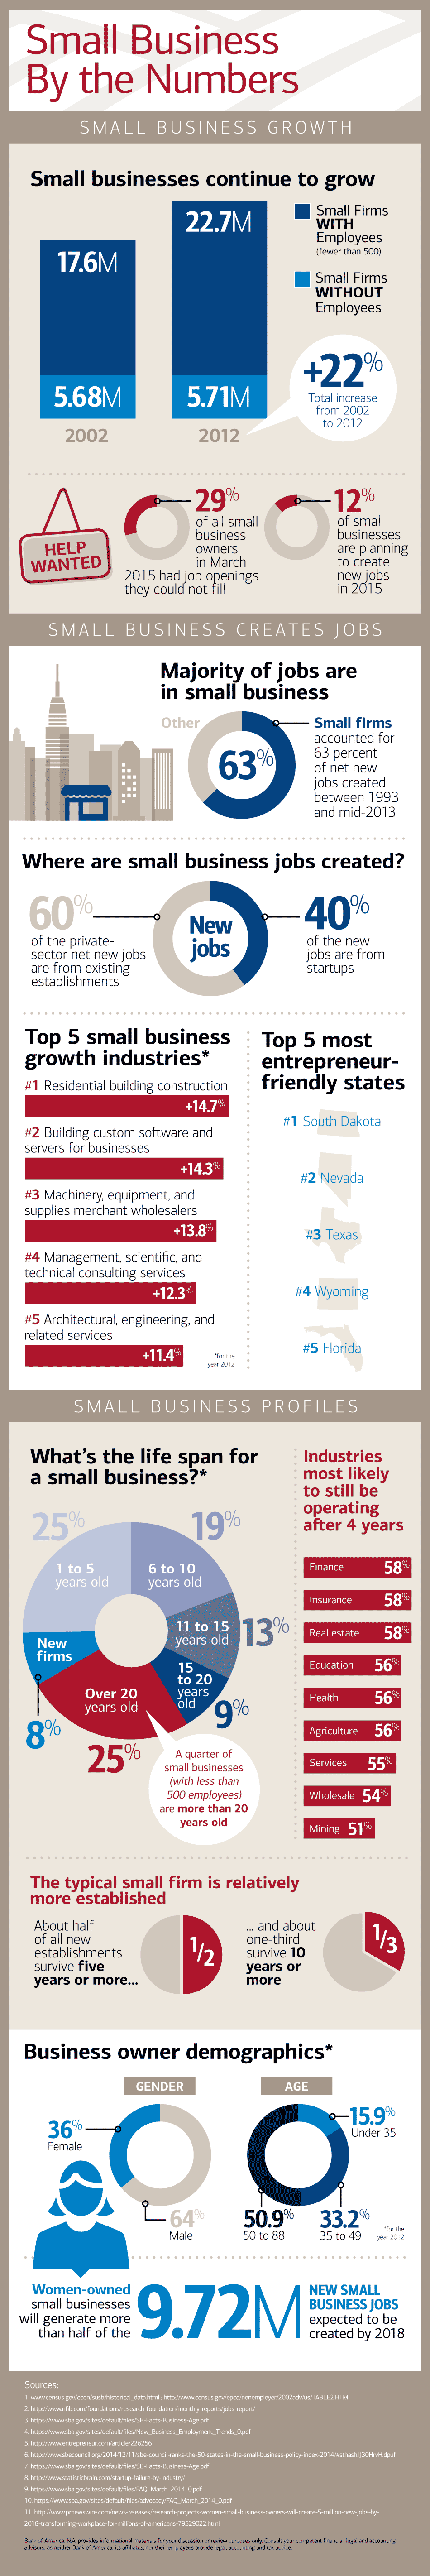 Small Business By the Numbers: Infographic